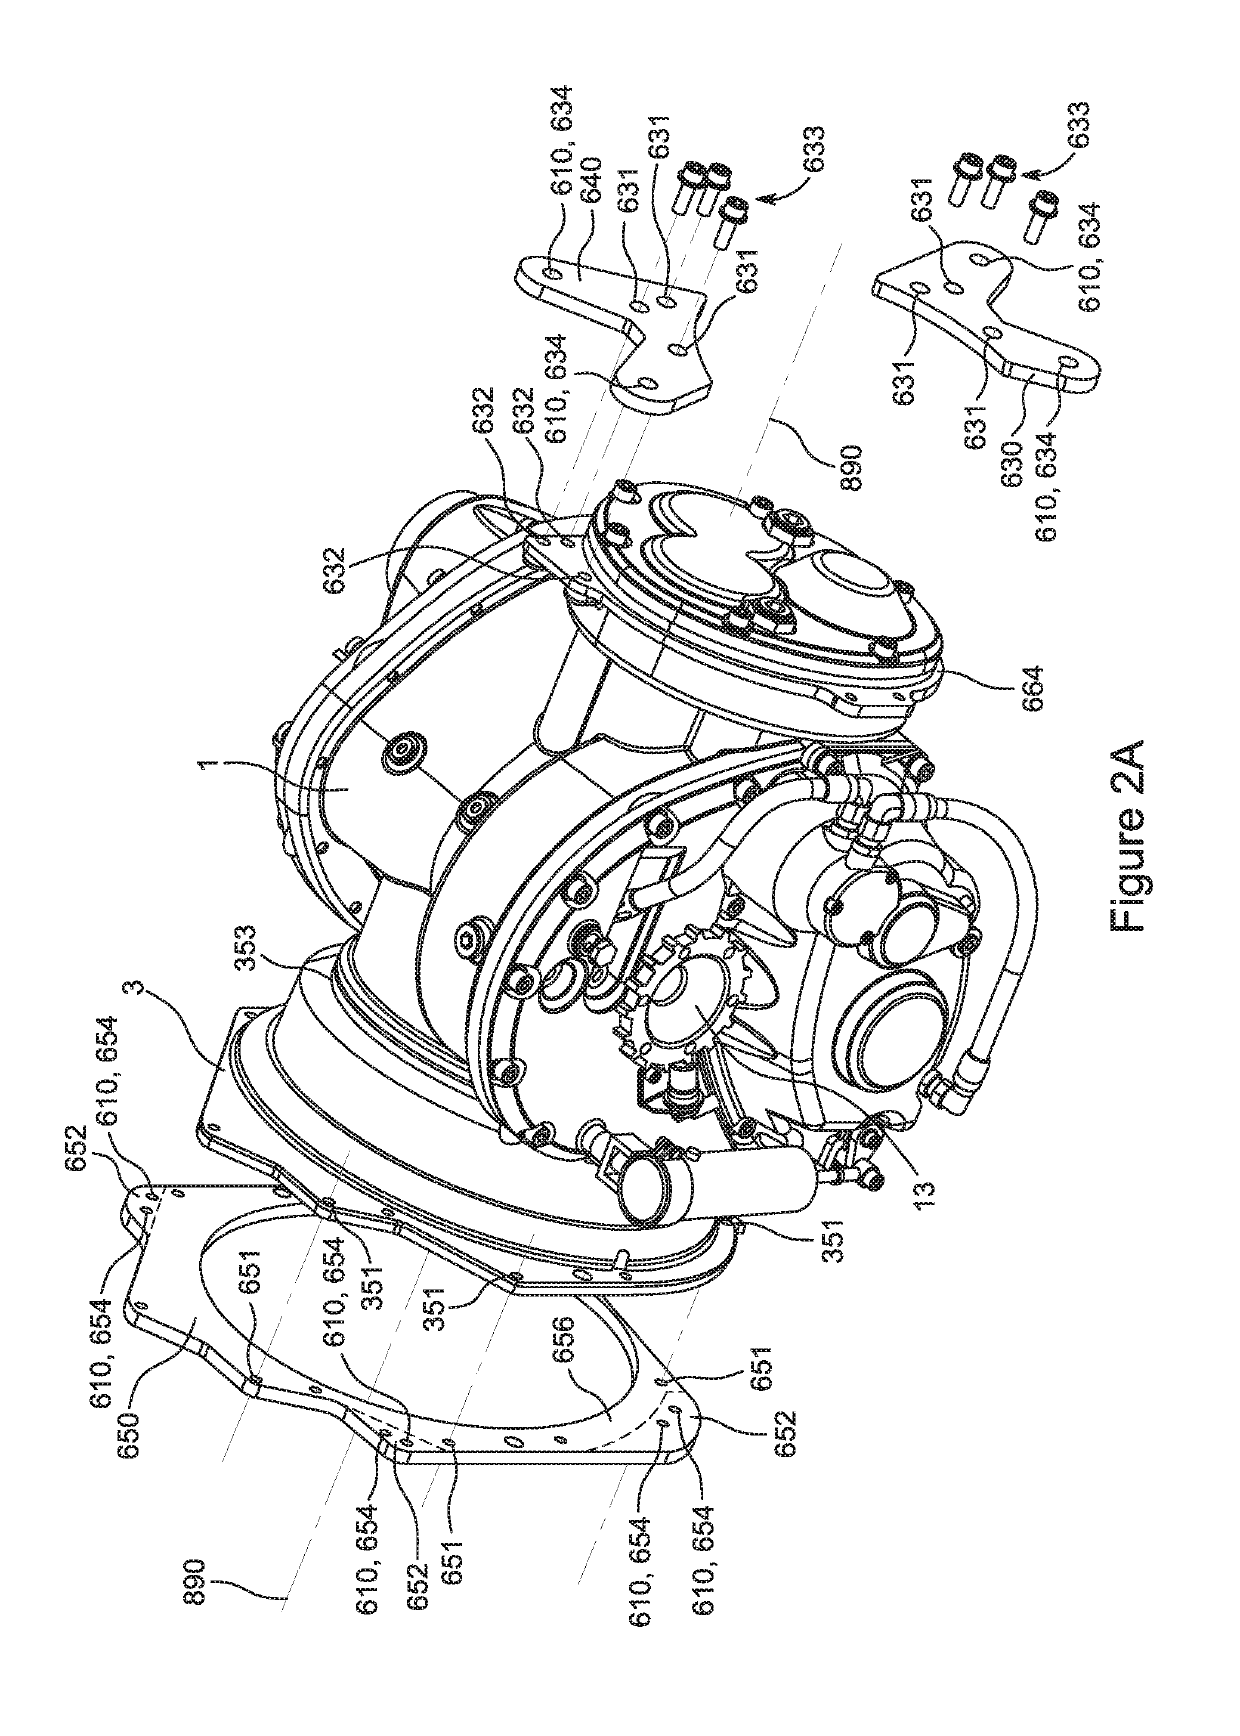 Gearbox Mounting System